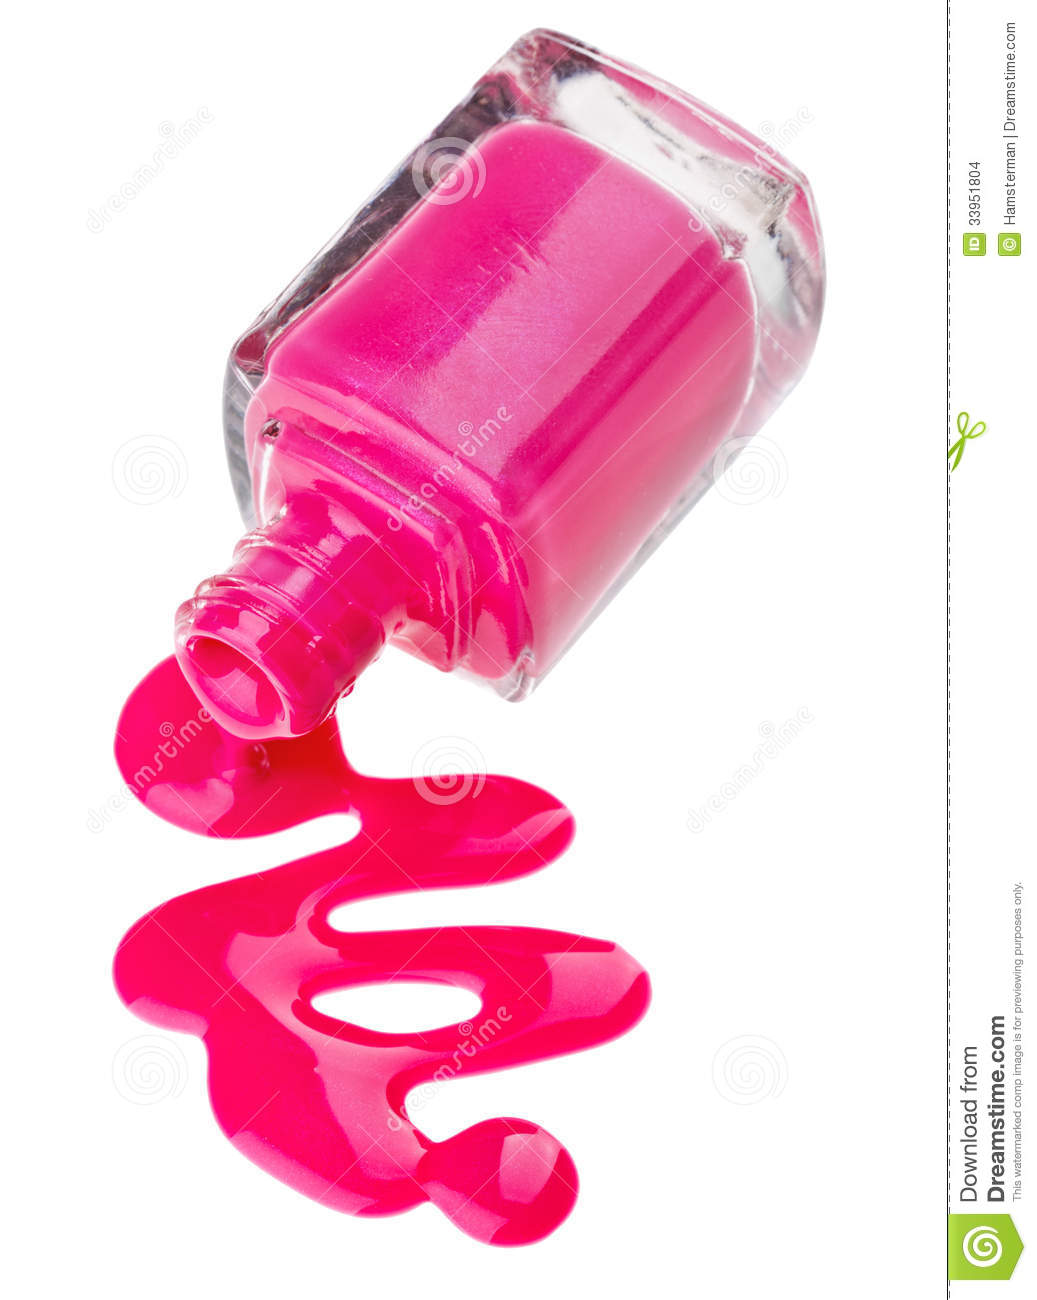 Bottle Of Pink Nail Polish With Enamel Drop Samples Isolated On White